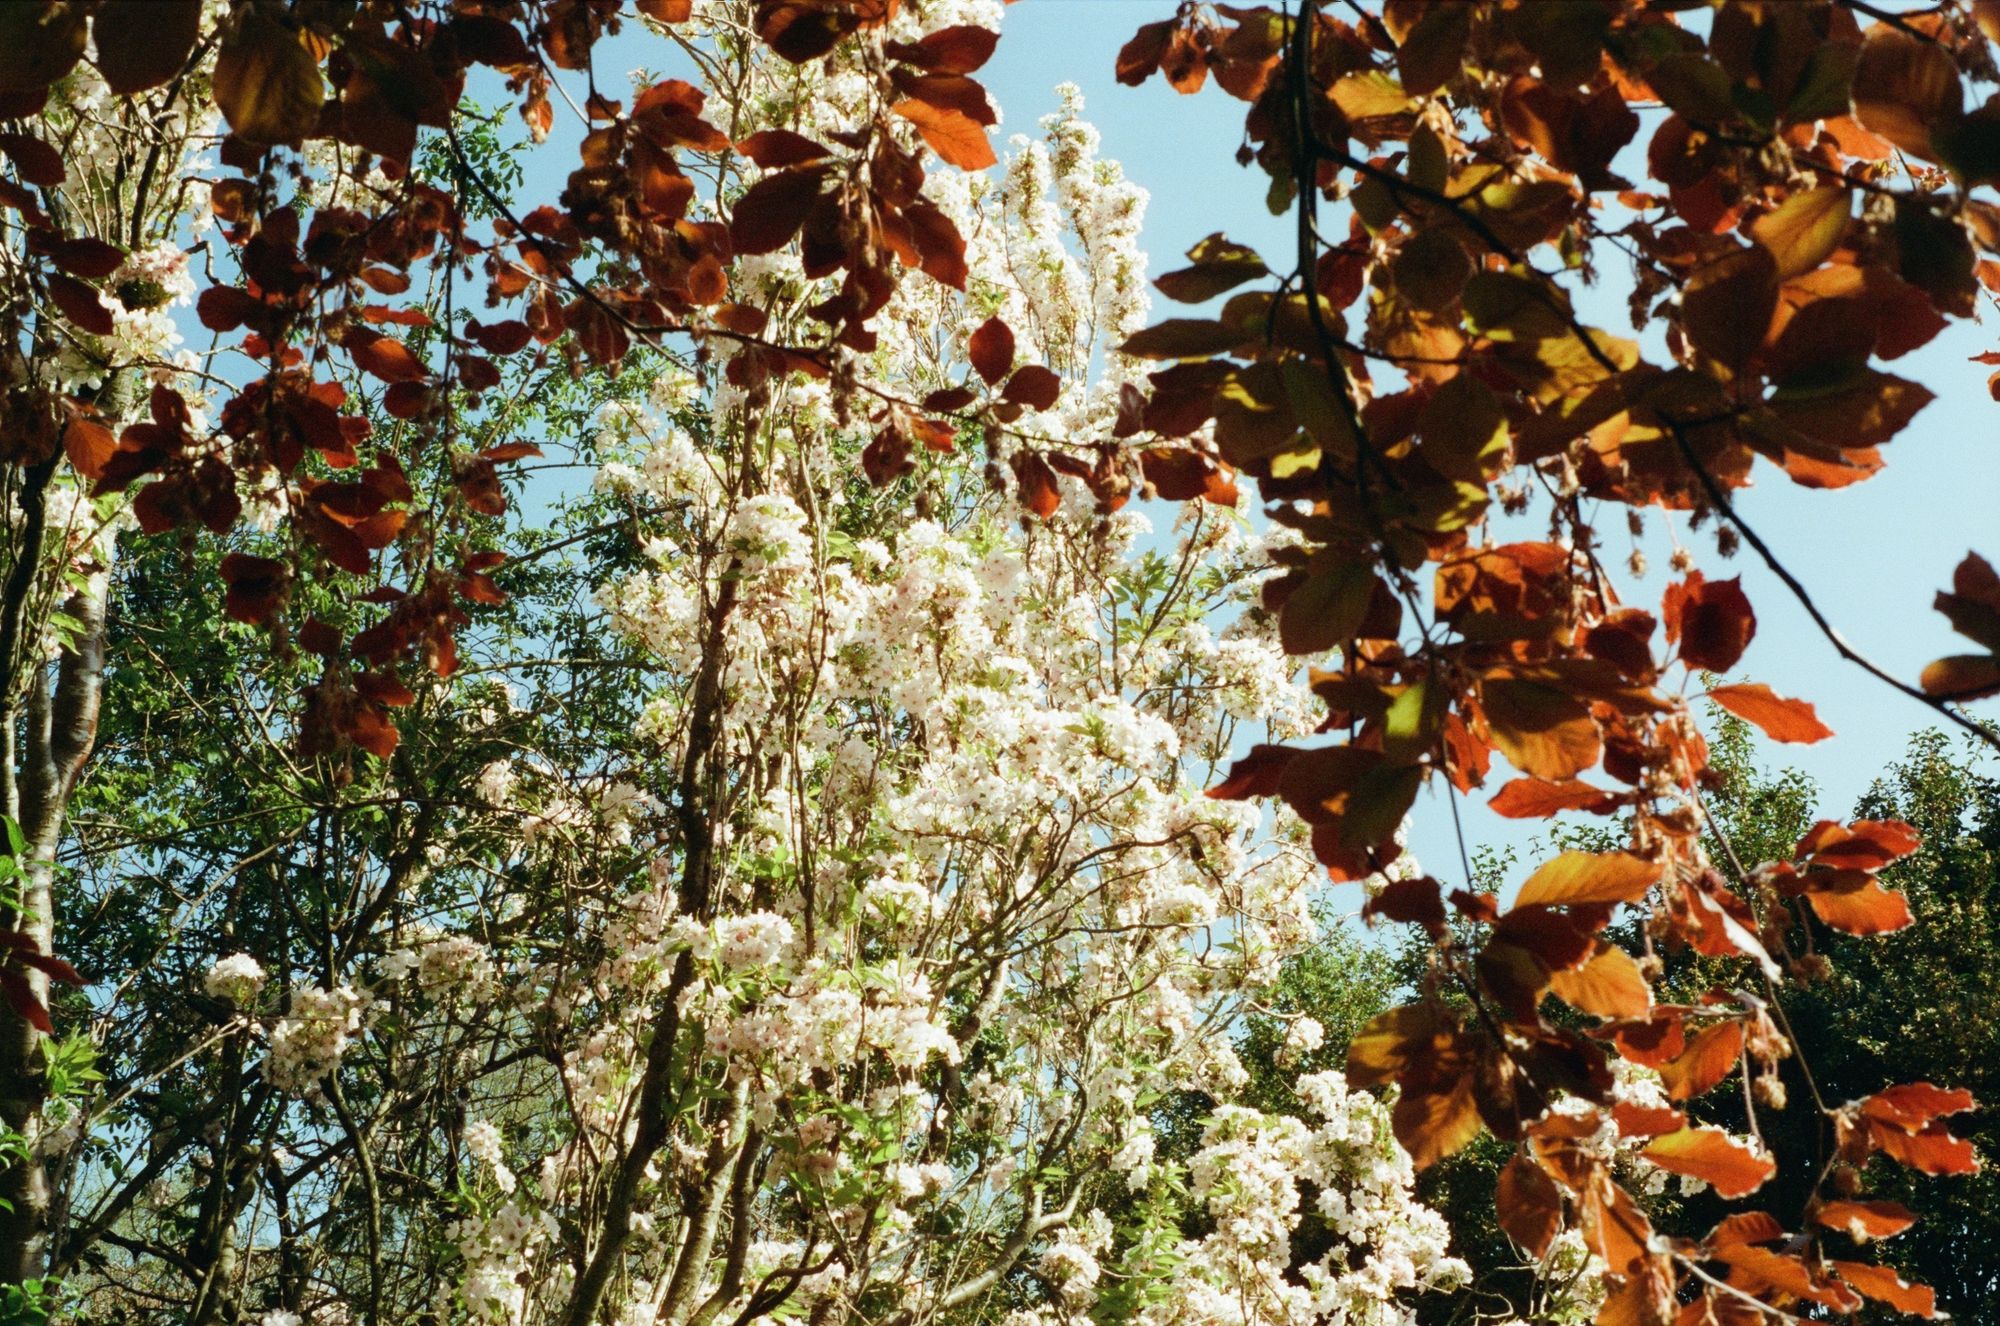 Through the hanging branches of a beech tree with fresh red-orange leaves, we see another tree with glorious white blossom which blooms against the blue sky.